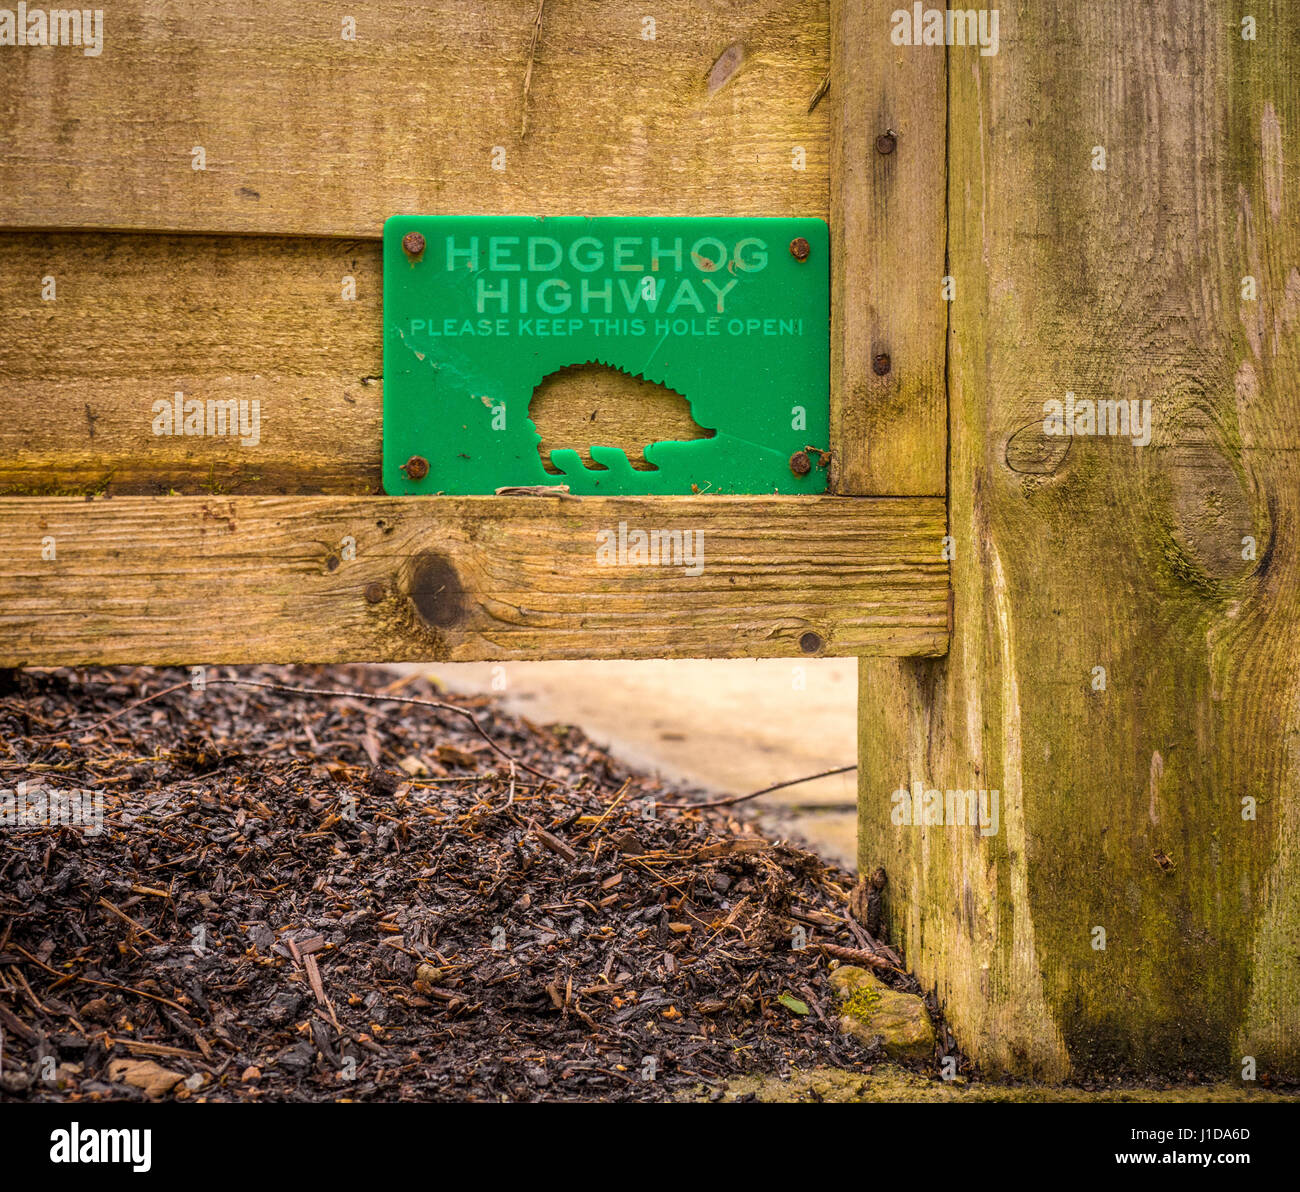 Hedgehog highway sign with gap under fence to allow access. Stock Photo